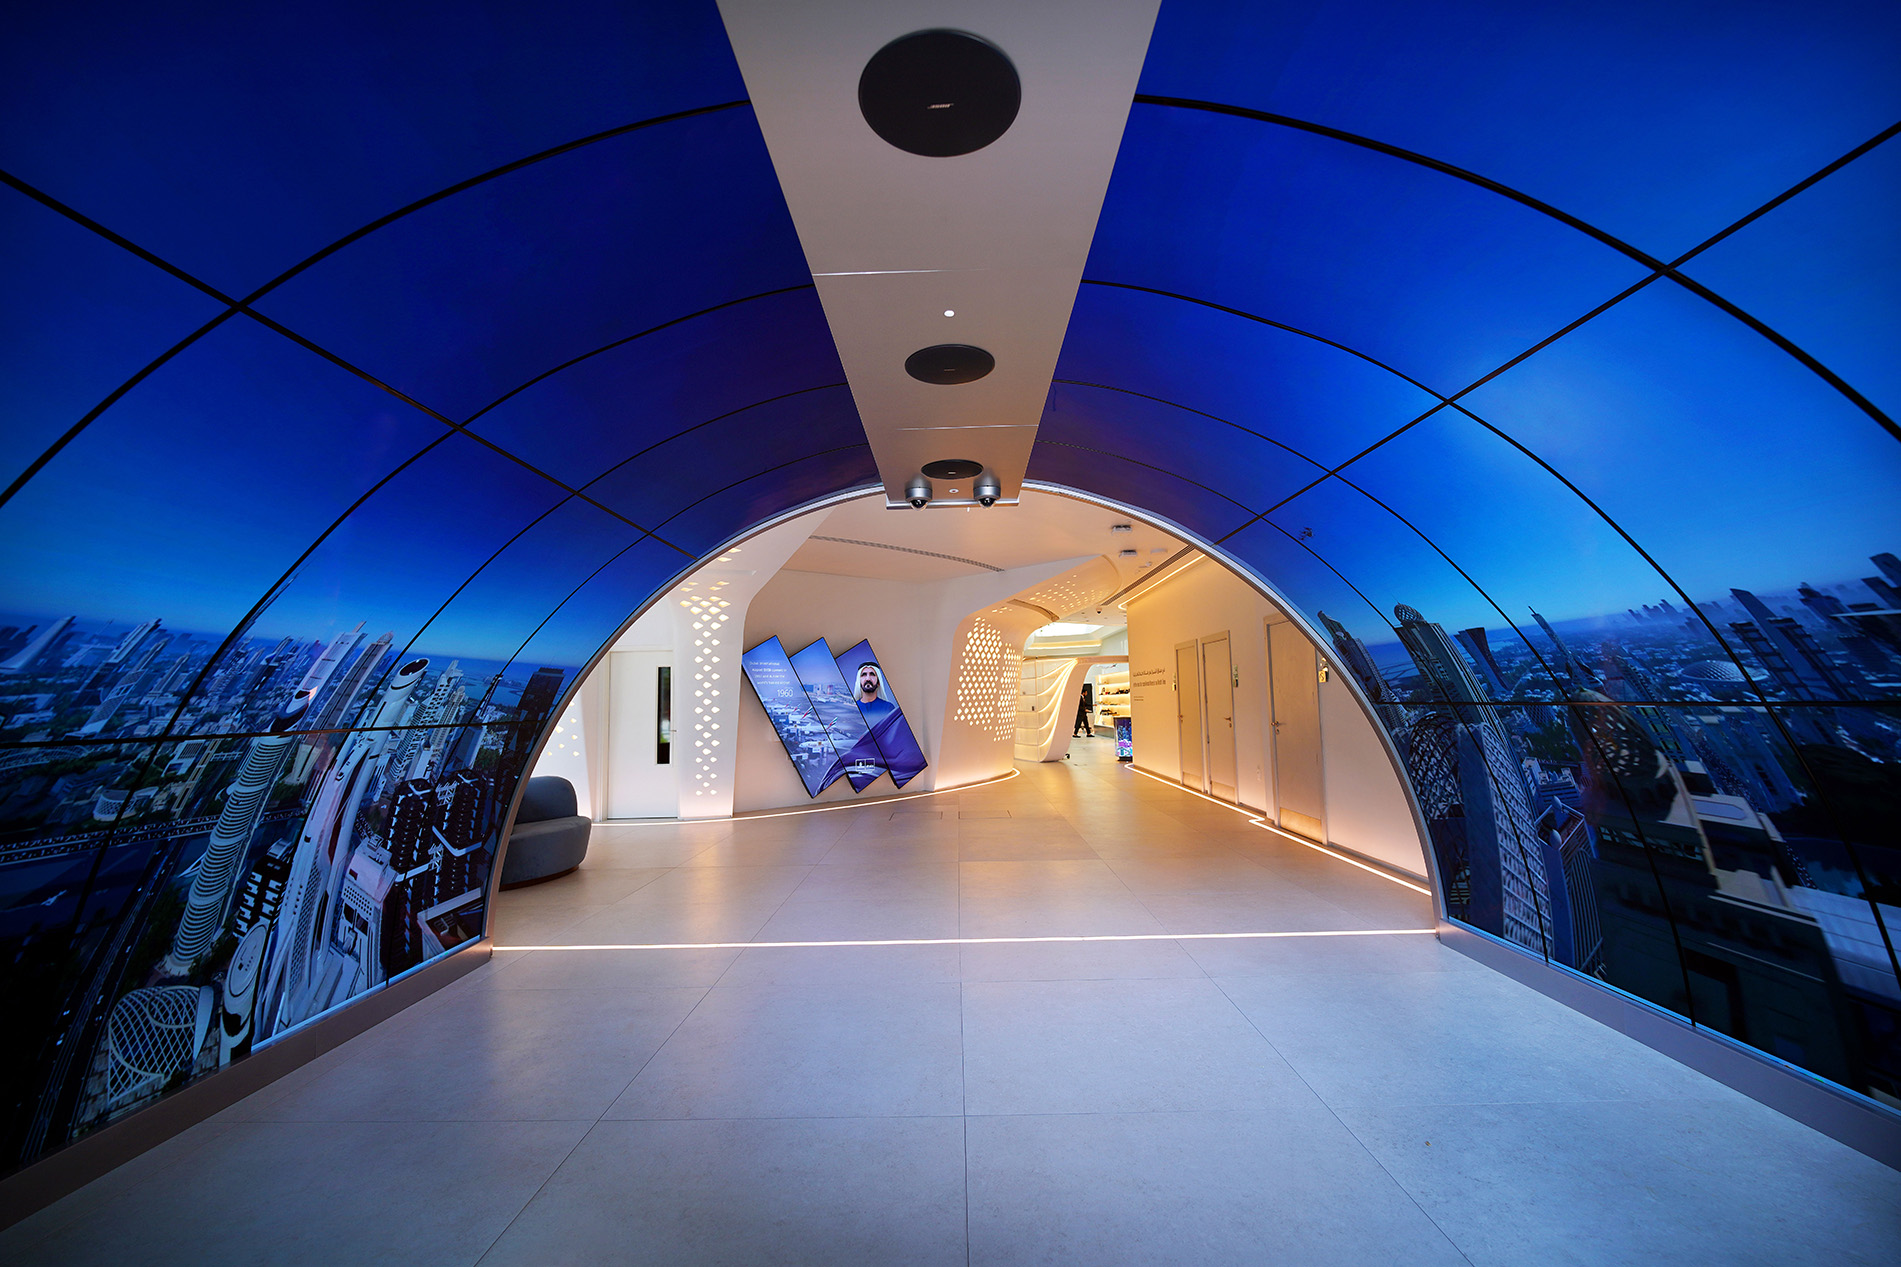 The immersive tunnel at the entrance that greets visitors at Ebdaa